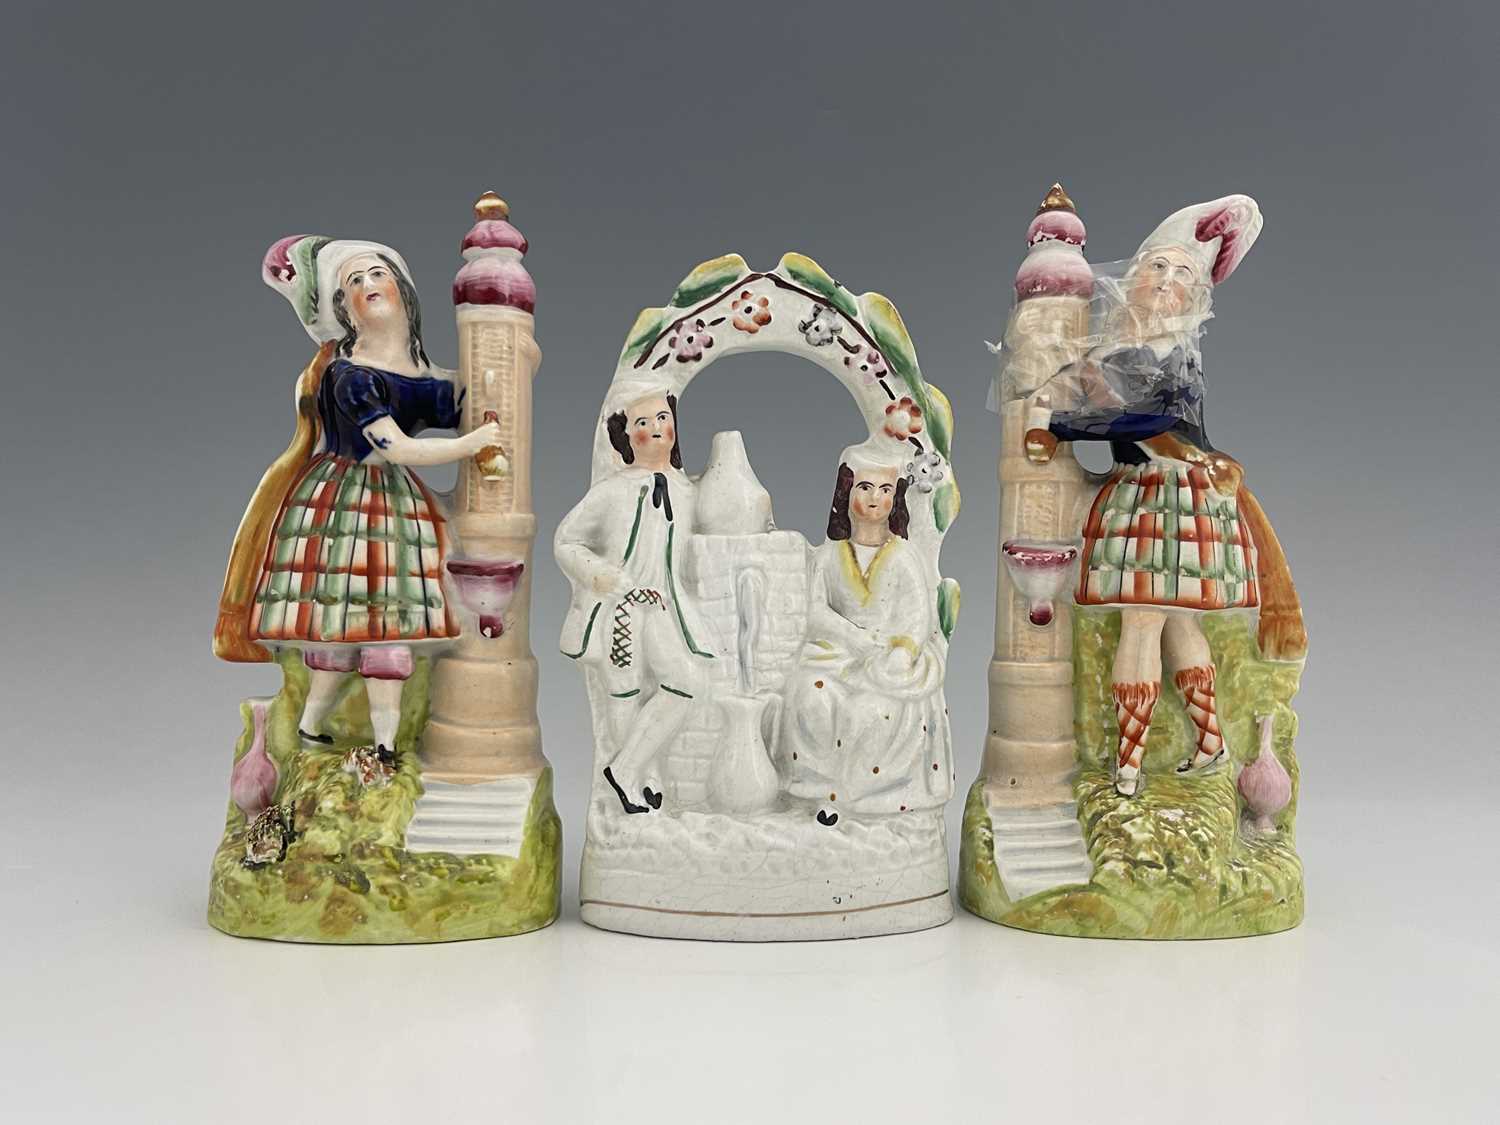 Staffordshire temperance figures collecting water from a fountain, circa 1860, figures modelled as a